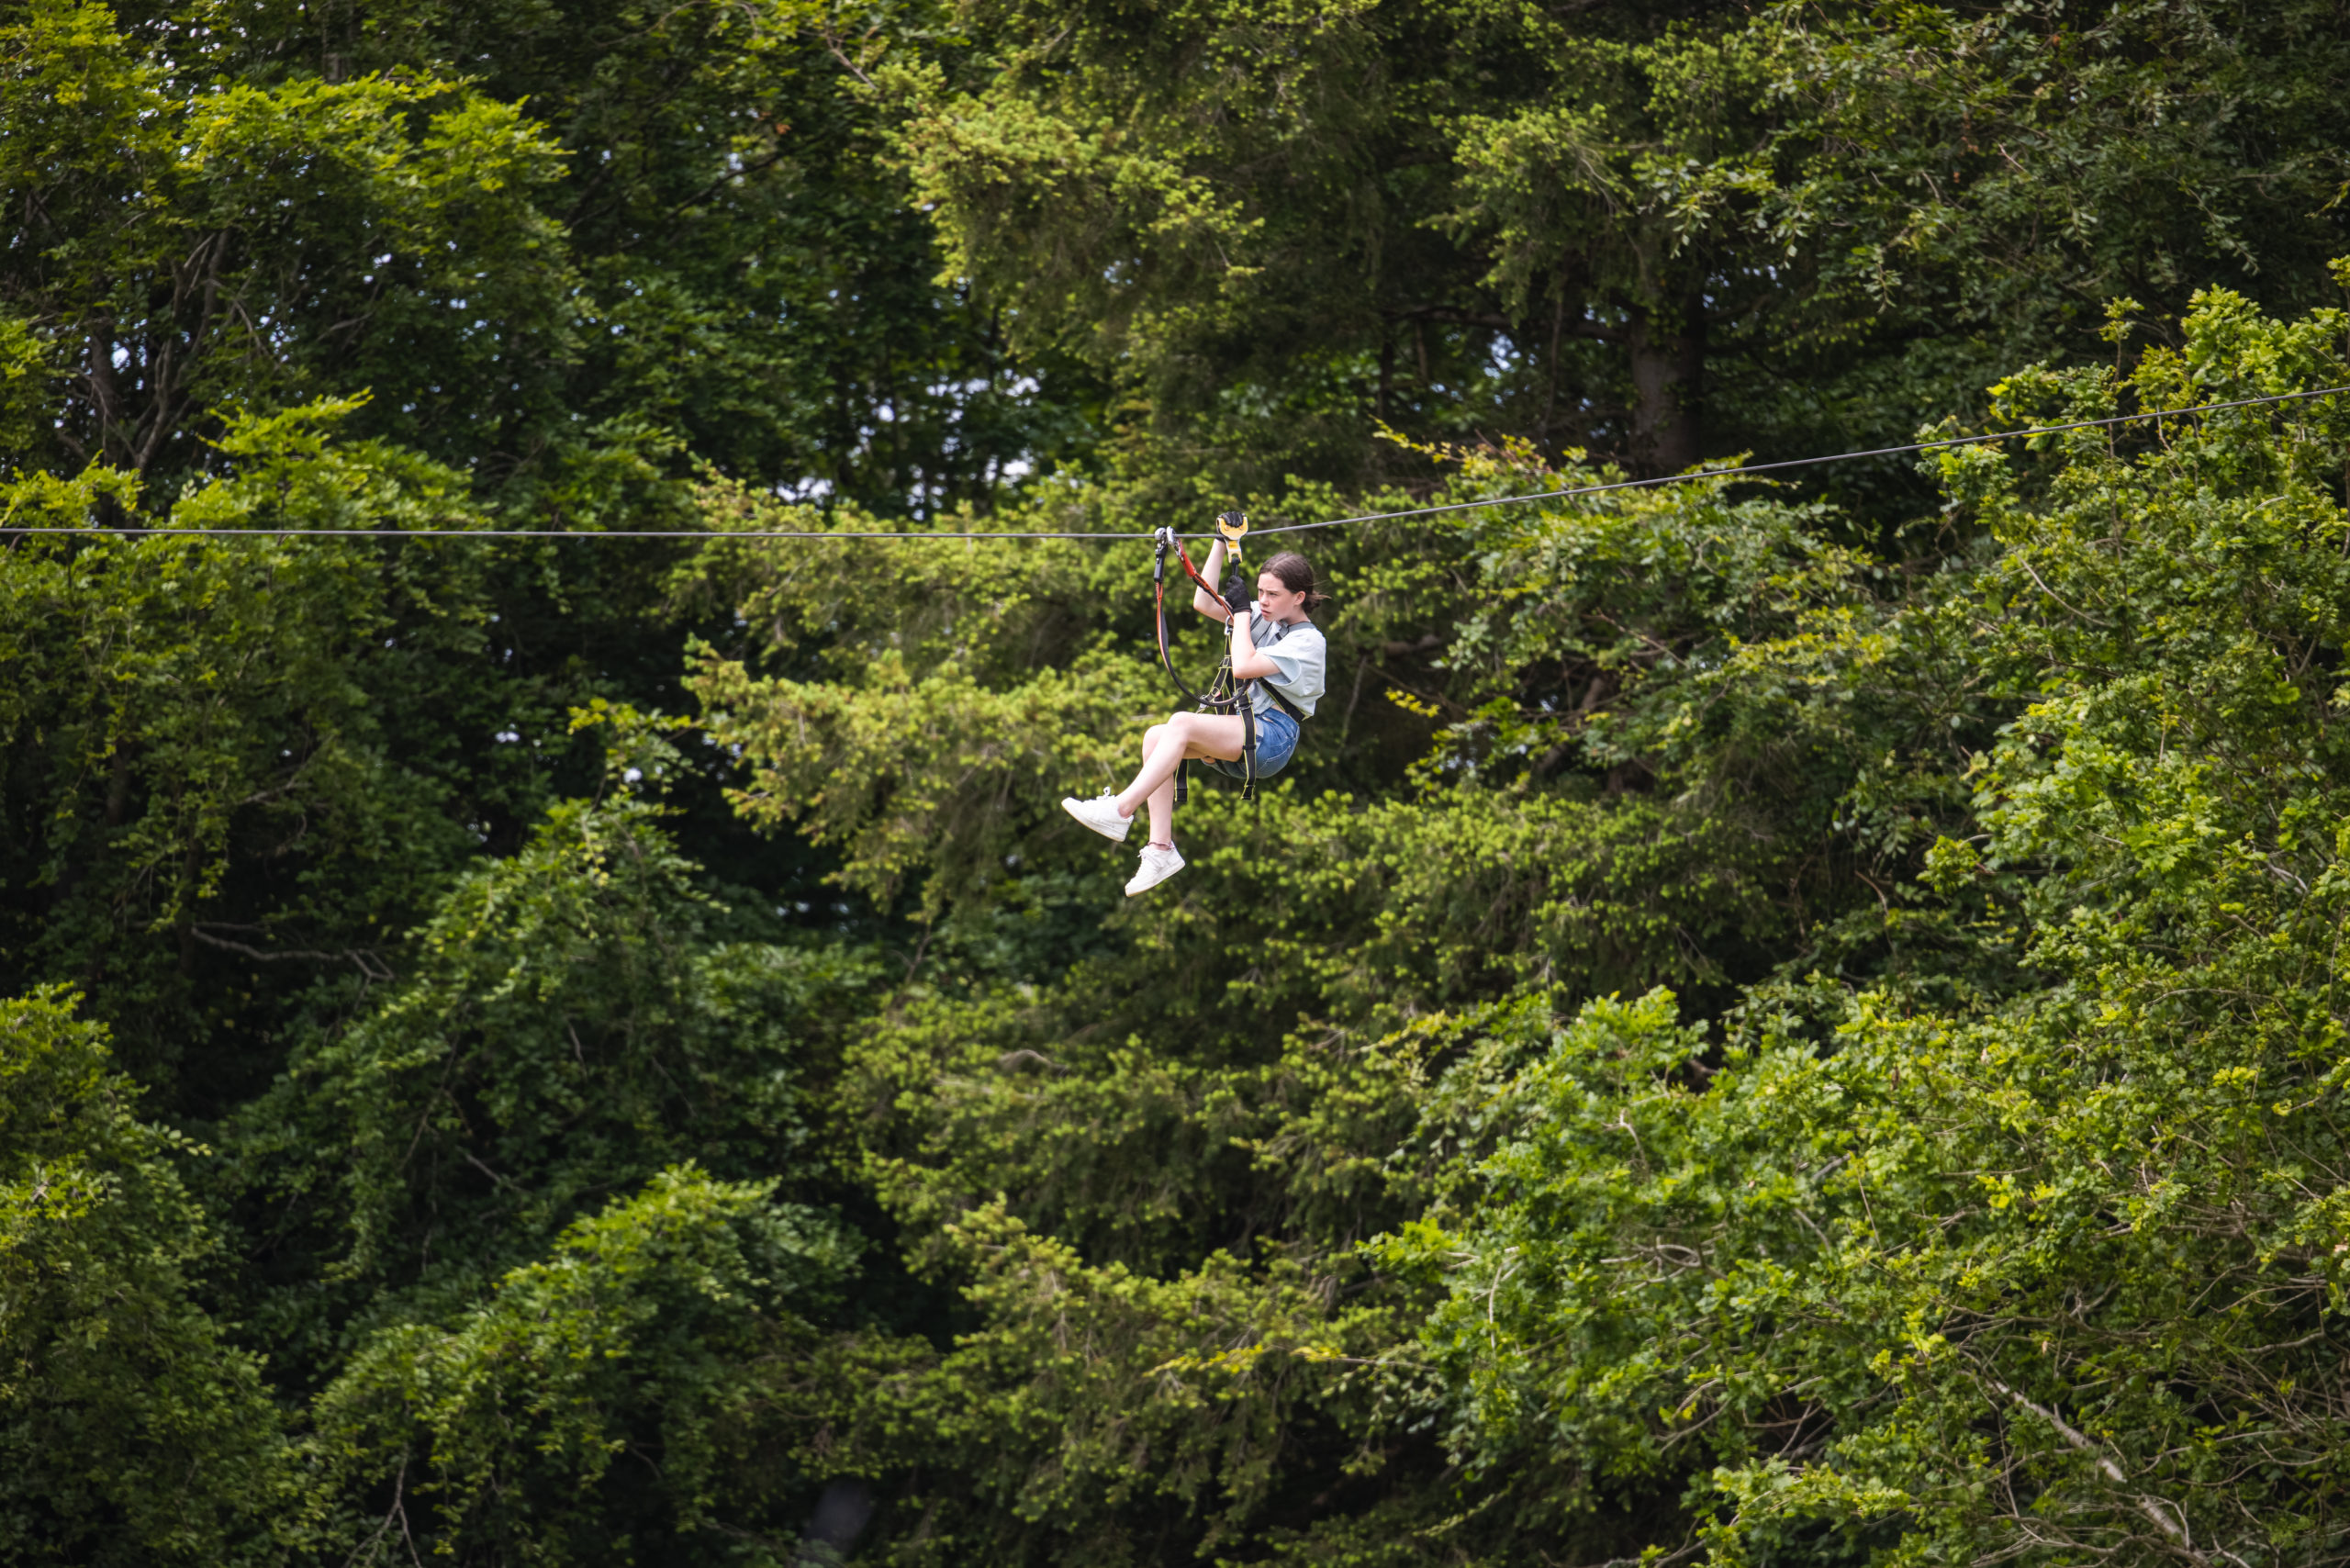 Top 5 Coillte forests for thrillseekers this summer